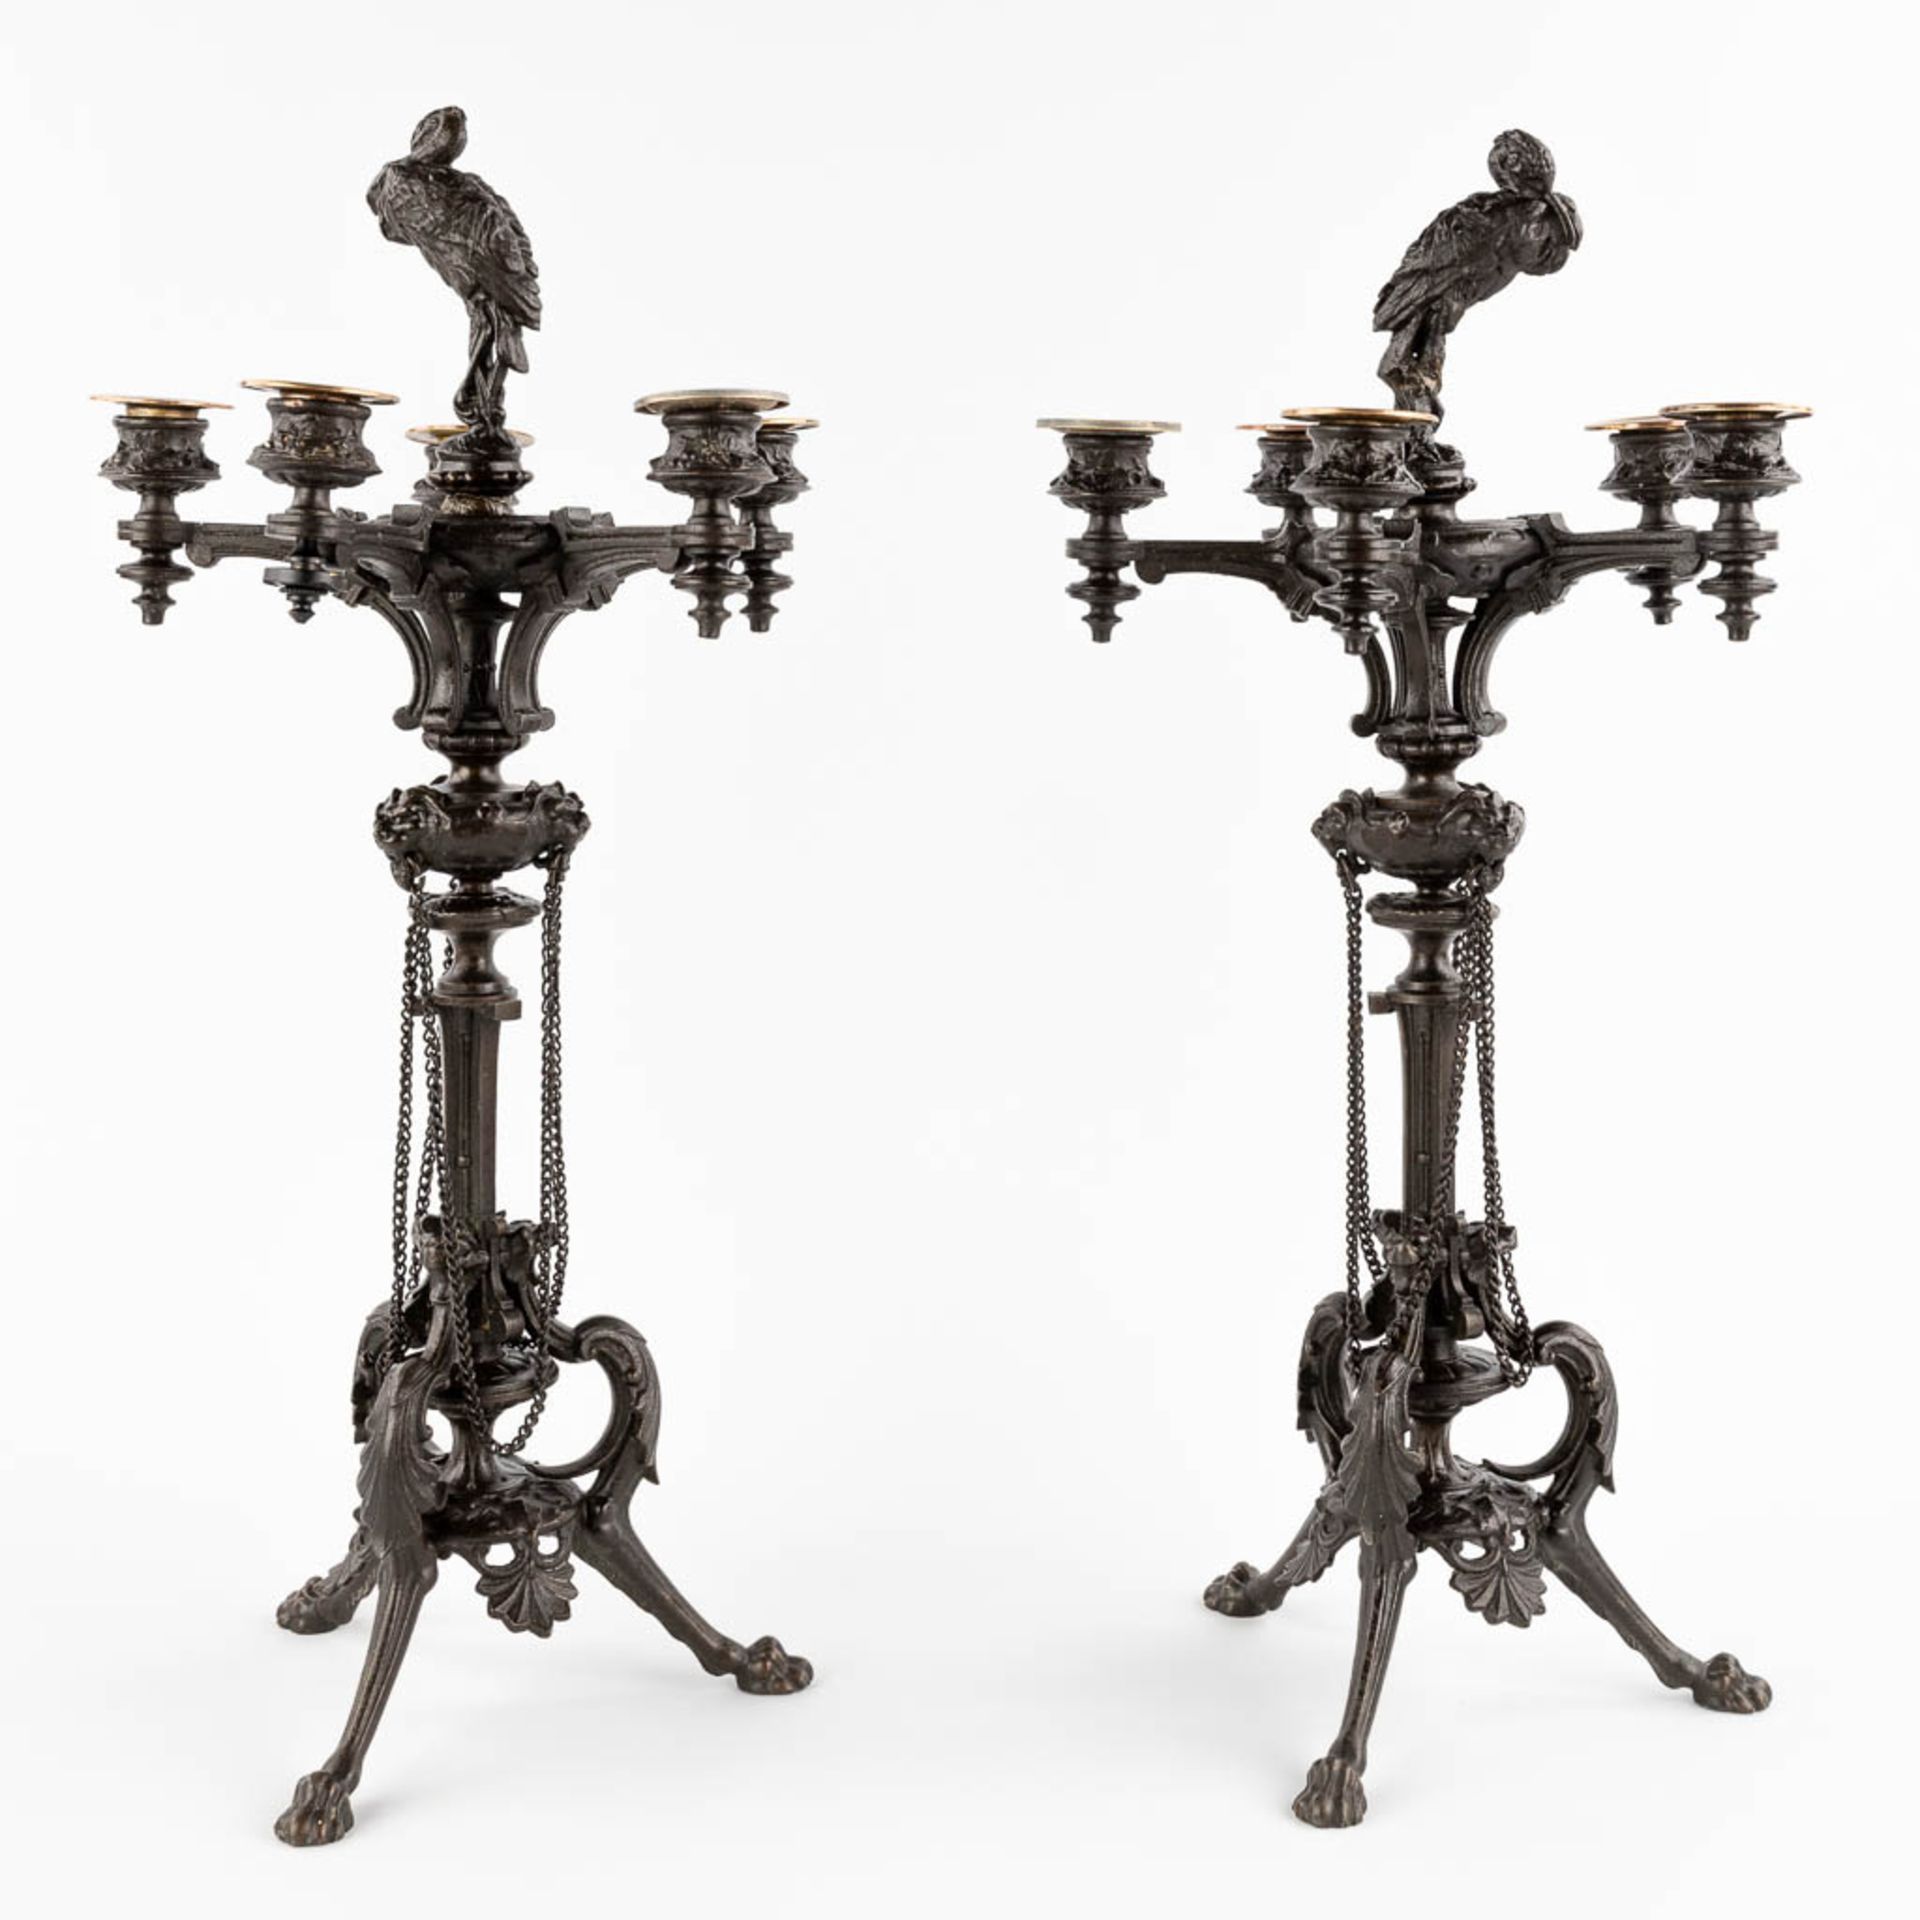 A pair of candelabra, bronze decorated with birds. 19th C. (H:56 x D:26 cm) - Image 4 of 12